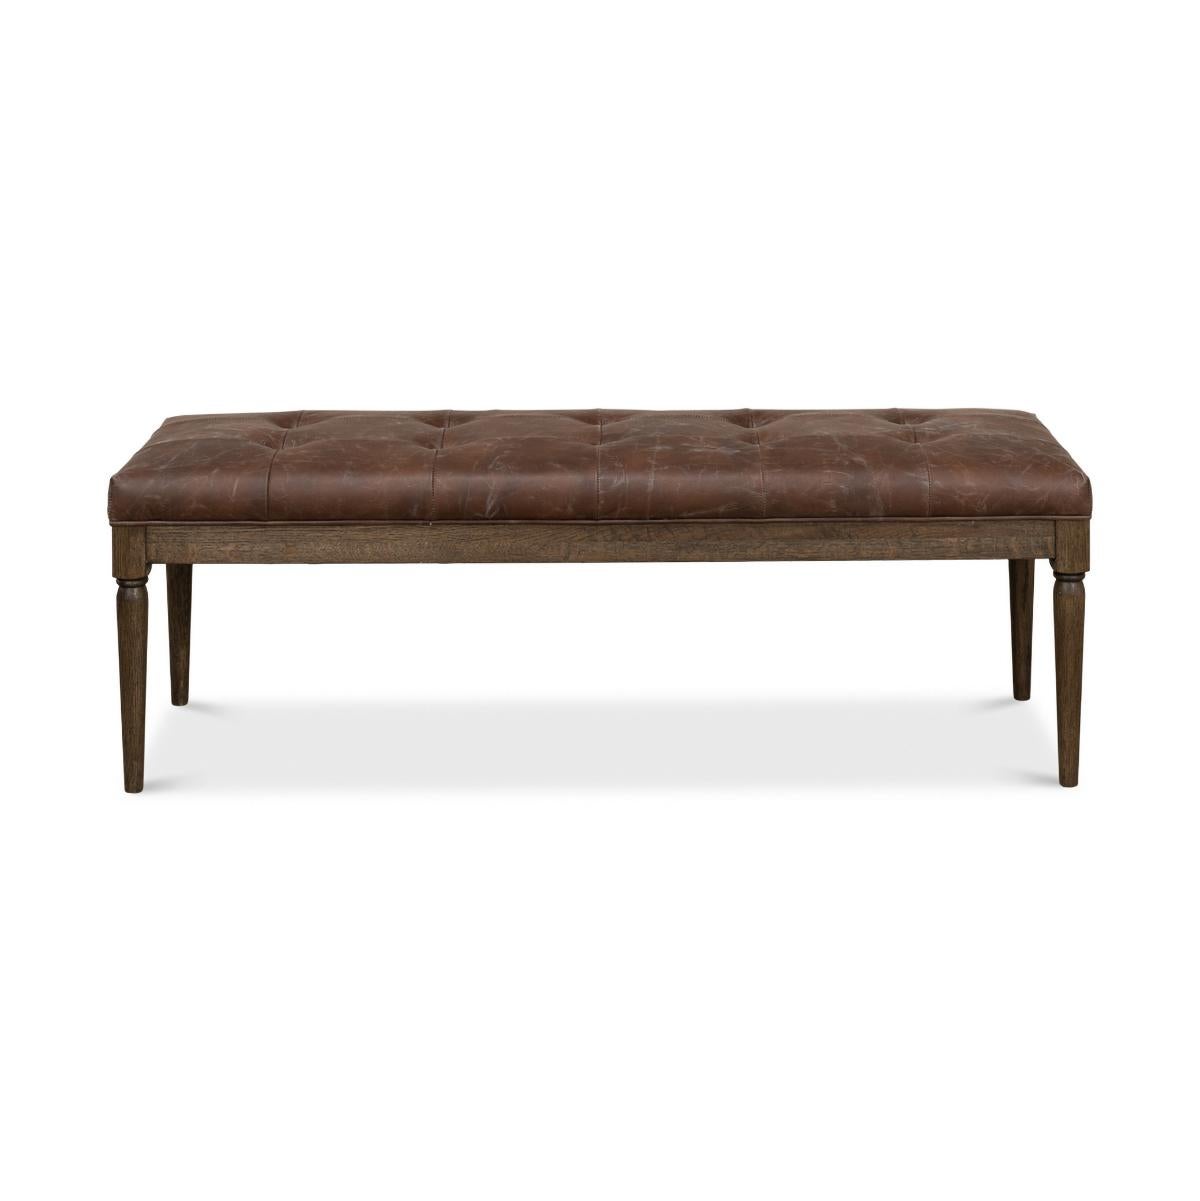 A French Directoire style leather bench with a button tufted antique brown leather on an oak base with a warm finish and turned and tapered legs.

Dimension: 51